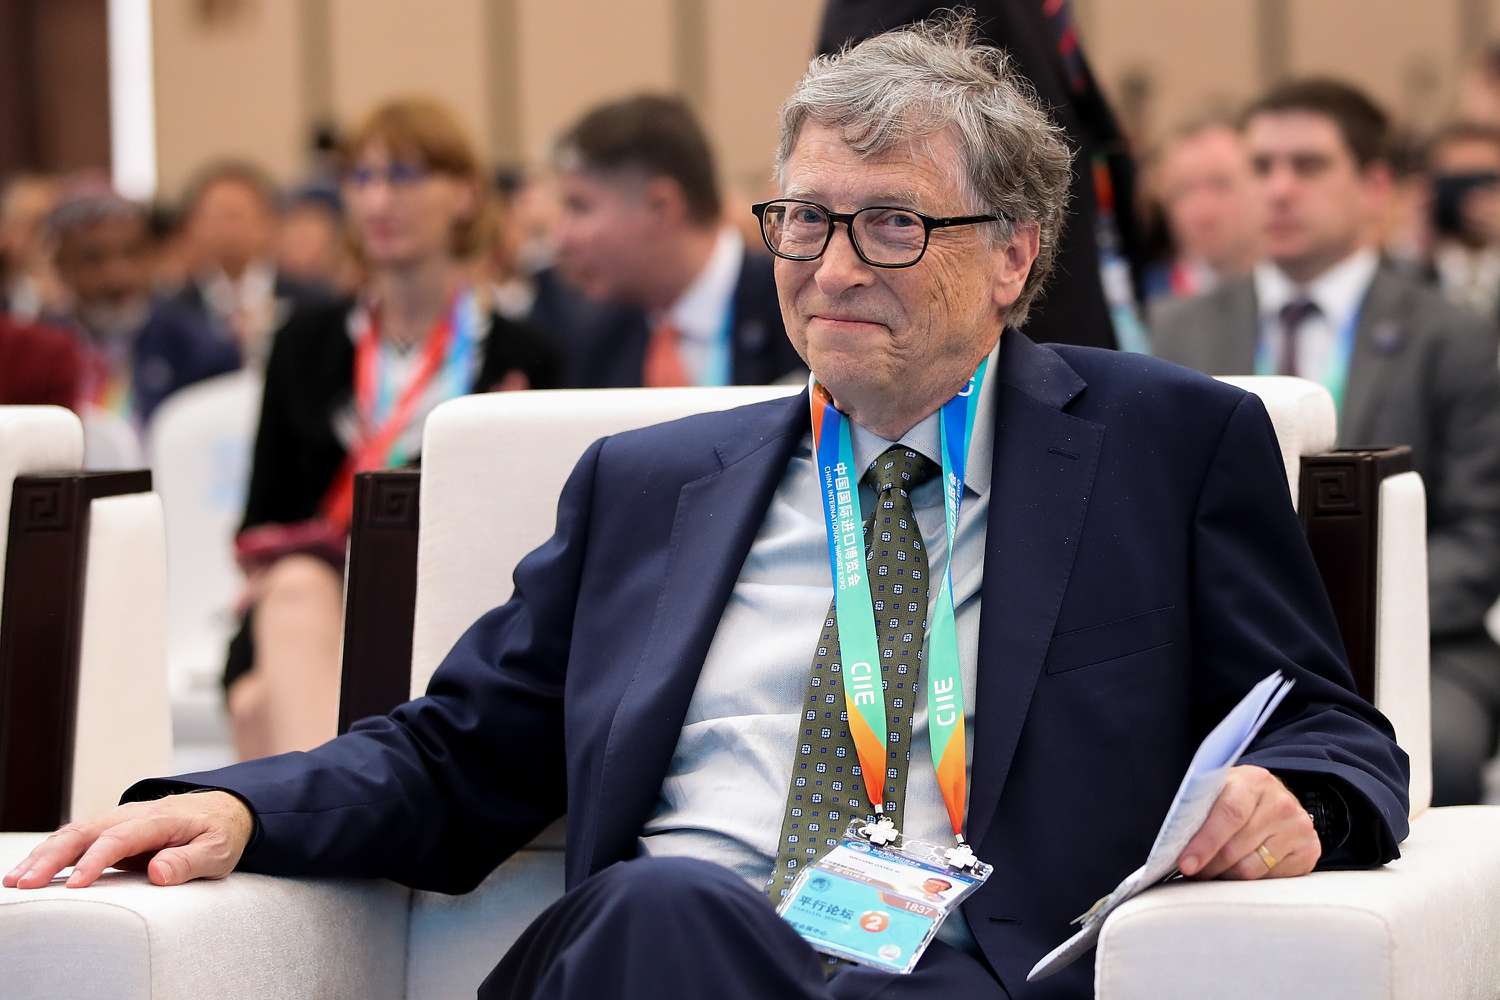 Read more about the article Bill Gates Biography